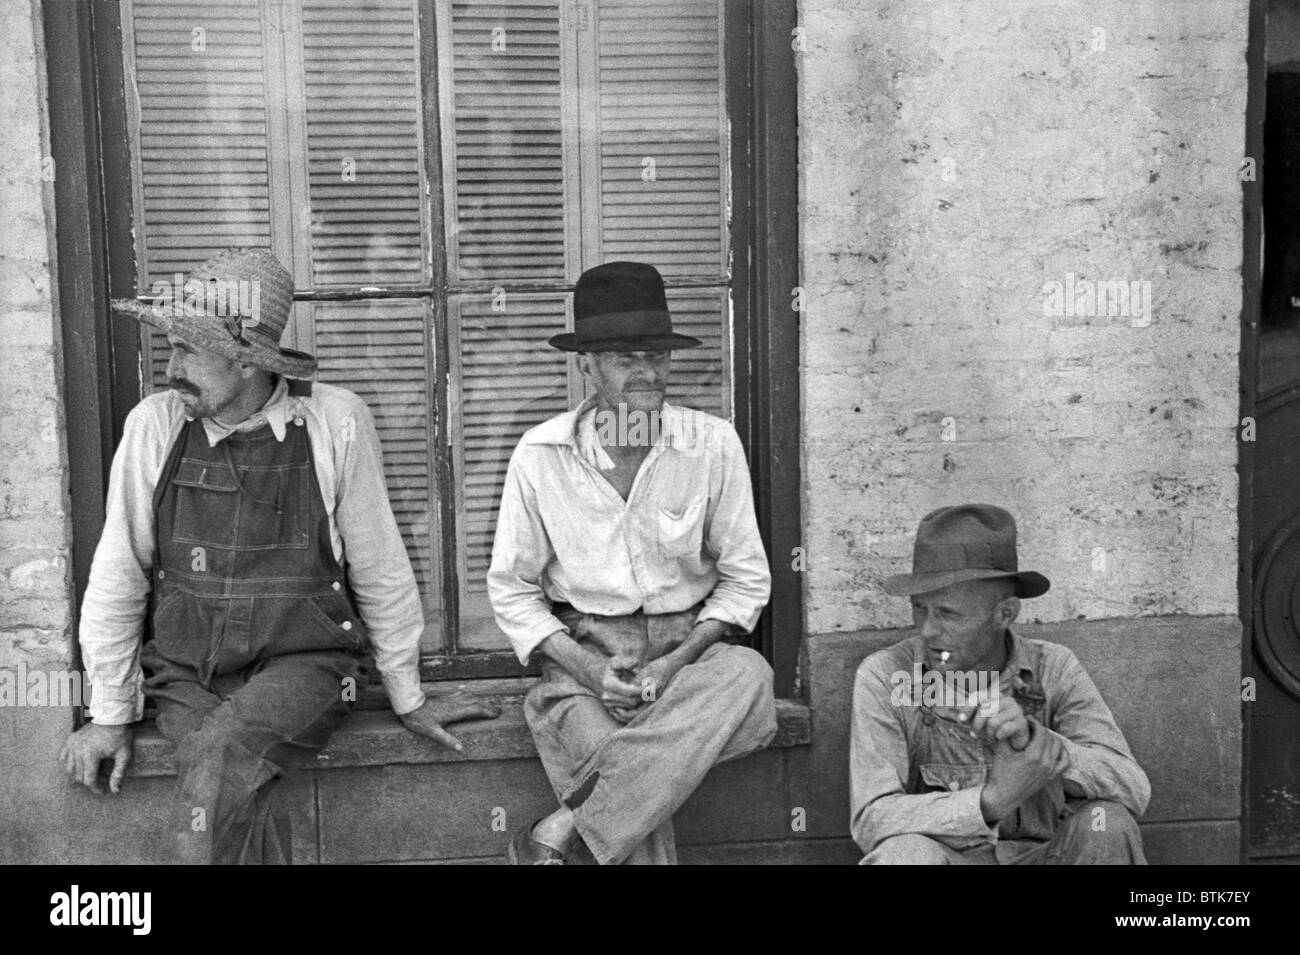 Frank Tengle, Bud Fields, and Floyd Burroughs, cotton sharecroppers. Hale County, Alabama. Published in the book, 'Let Us Now Praise Famous Men'. photograph by Walker Evans, 1936. Stock Photo